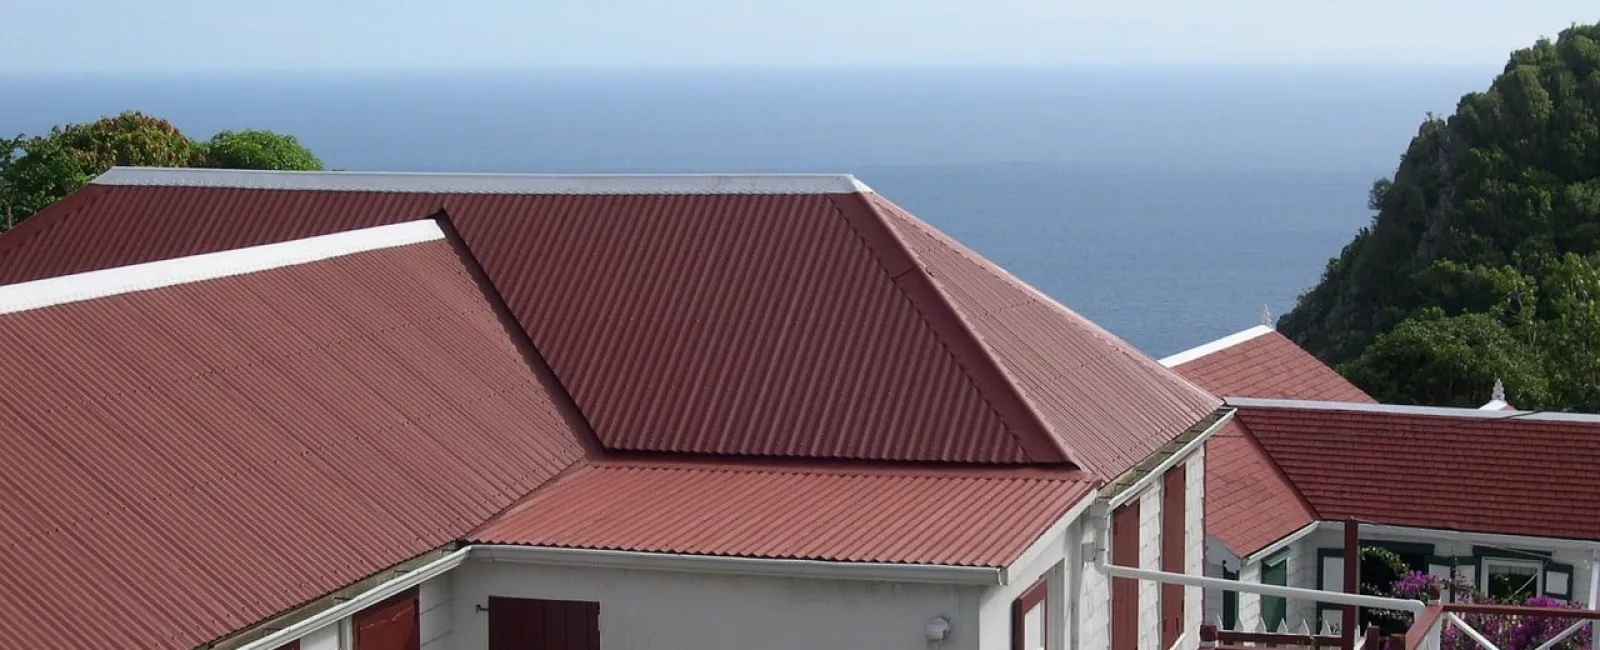 5 Reasons Why Metal Roofs Add Better Value to Your Home